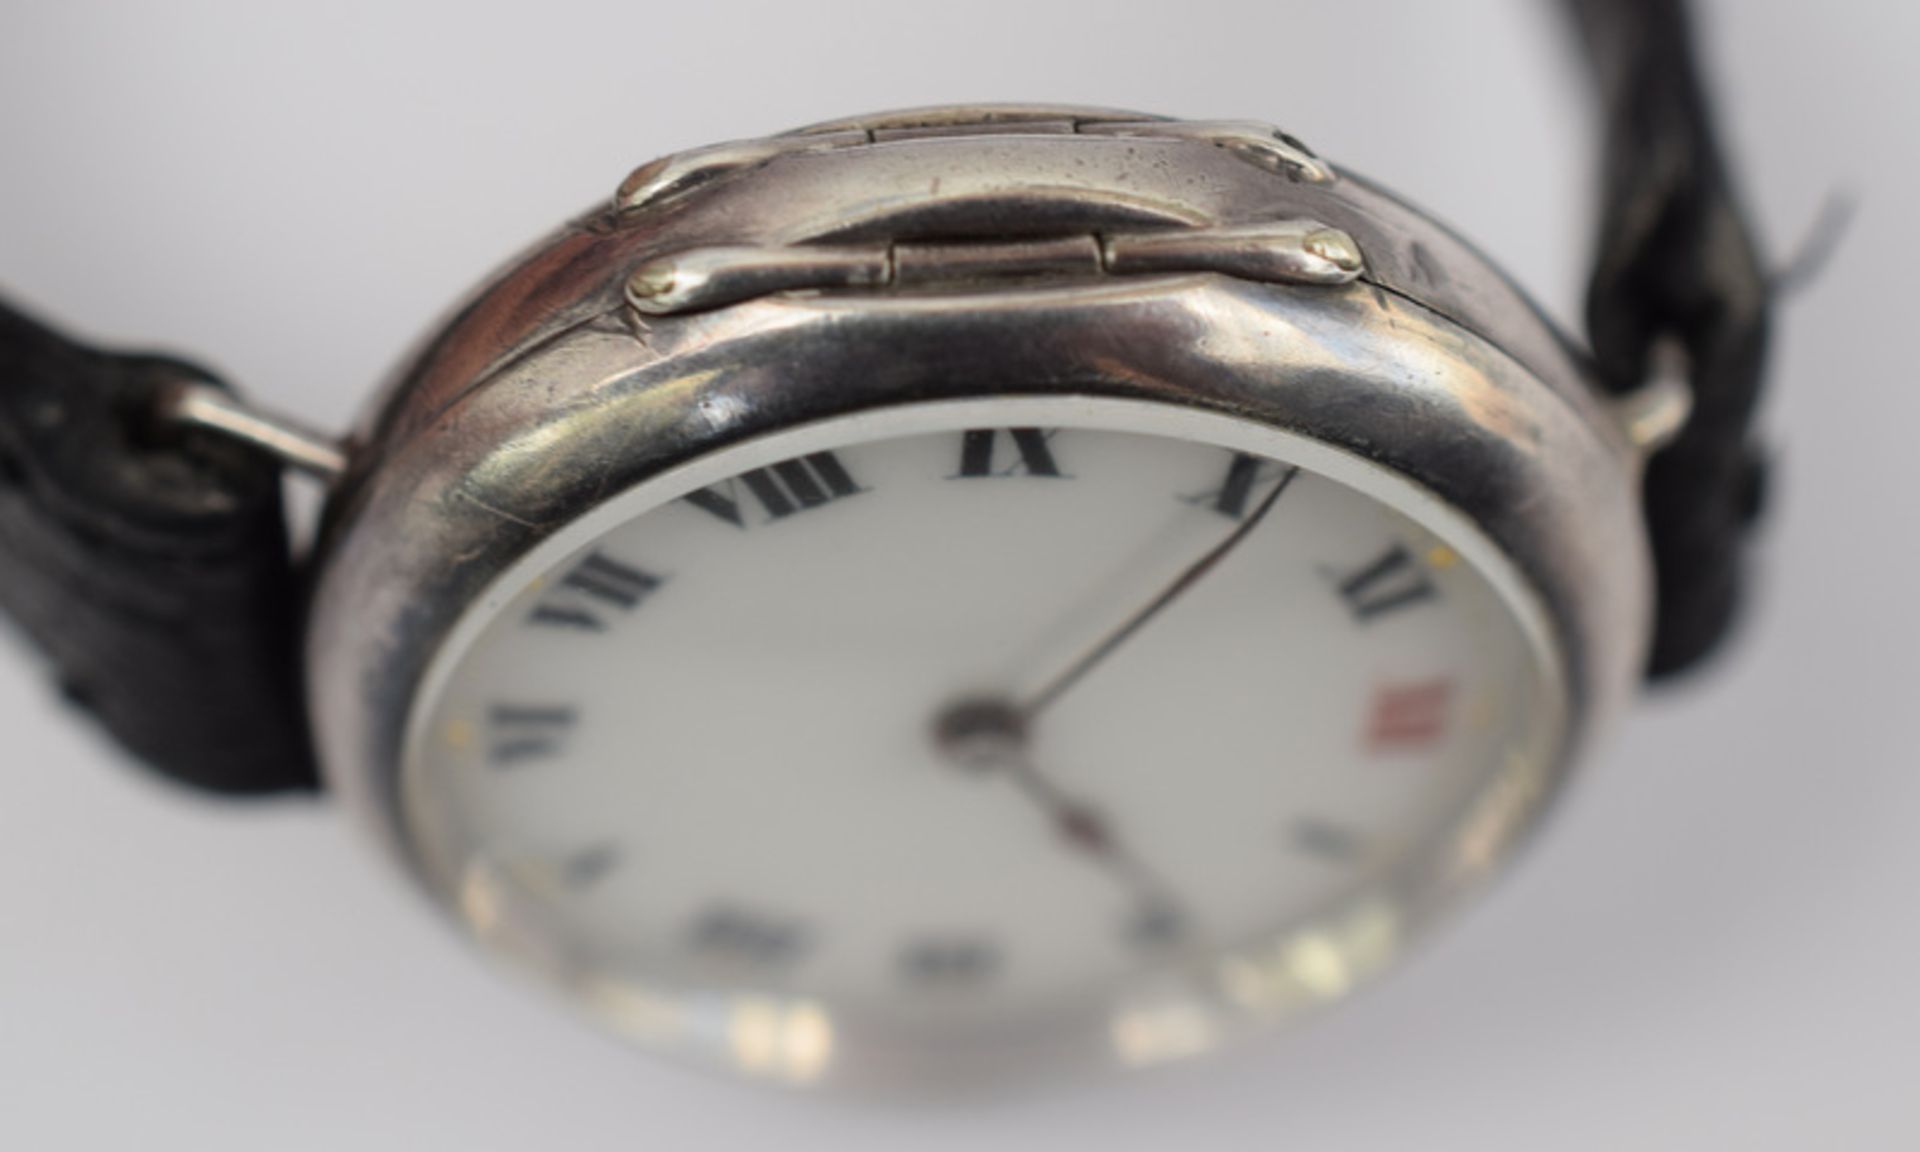 1916 Rolex Silver Trench Watch. - Image 3 of 7